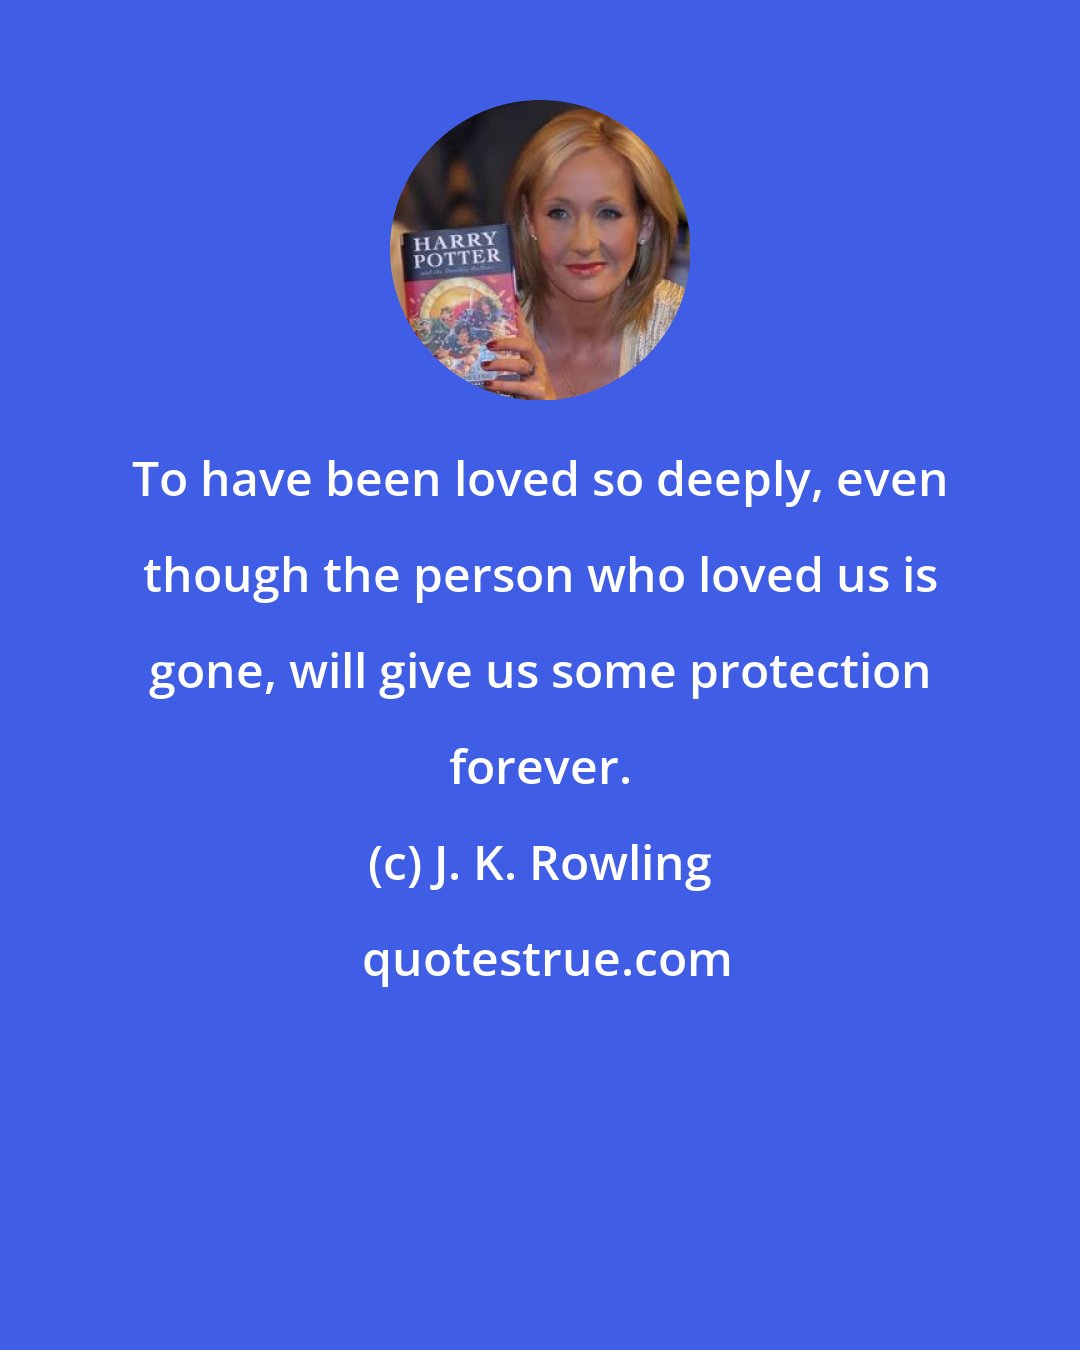 J. K. Rowling: To have been loved so deeply, even though the person who loved us is gone, will give us some protection forever.